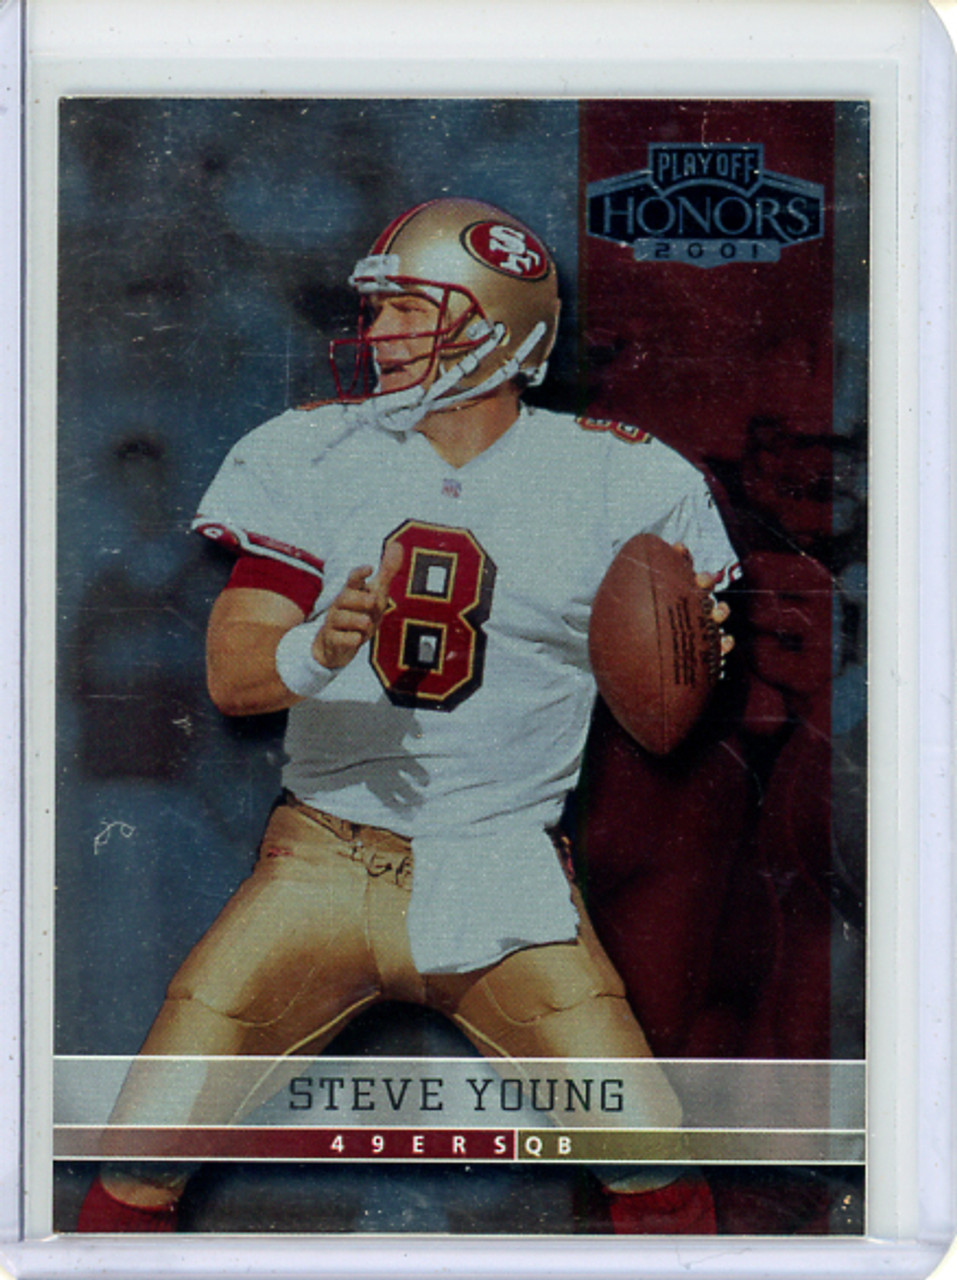 Steve Young 2001 Playoff Honors #98 (CQ)